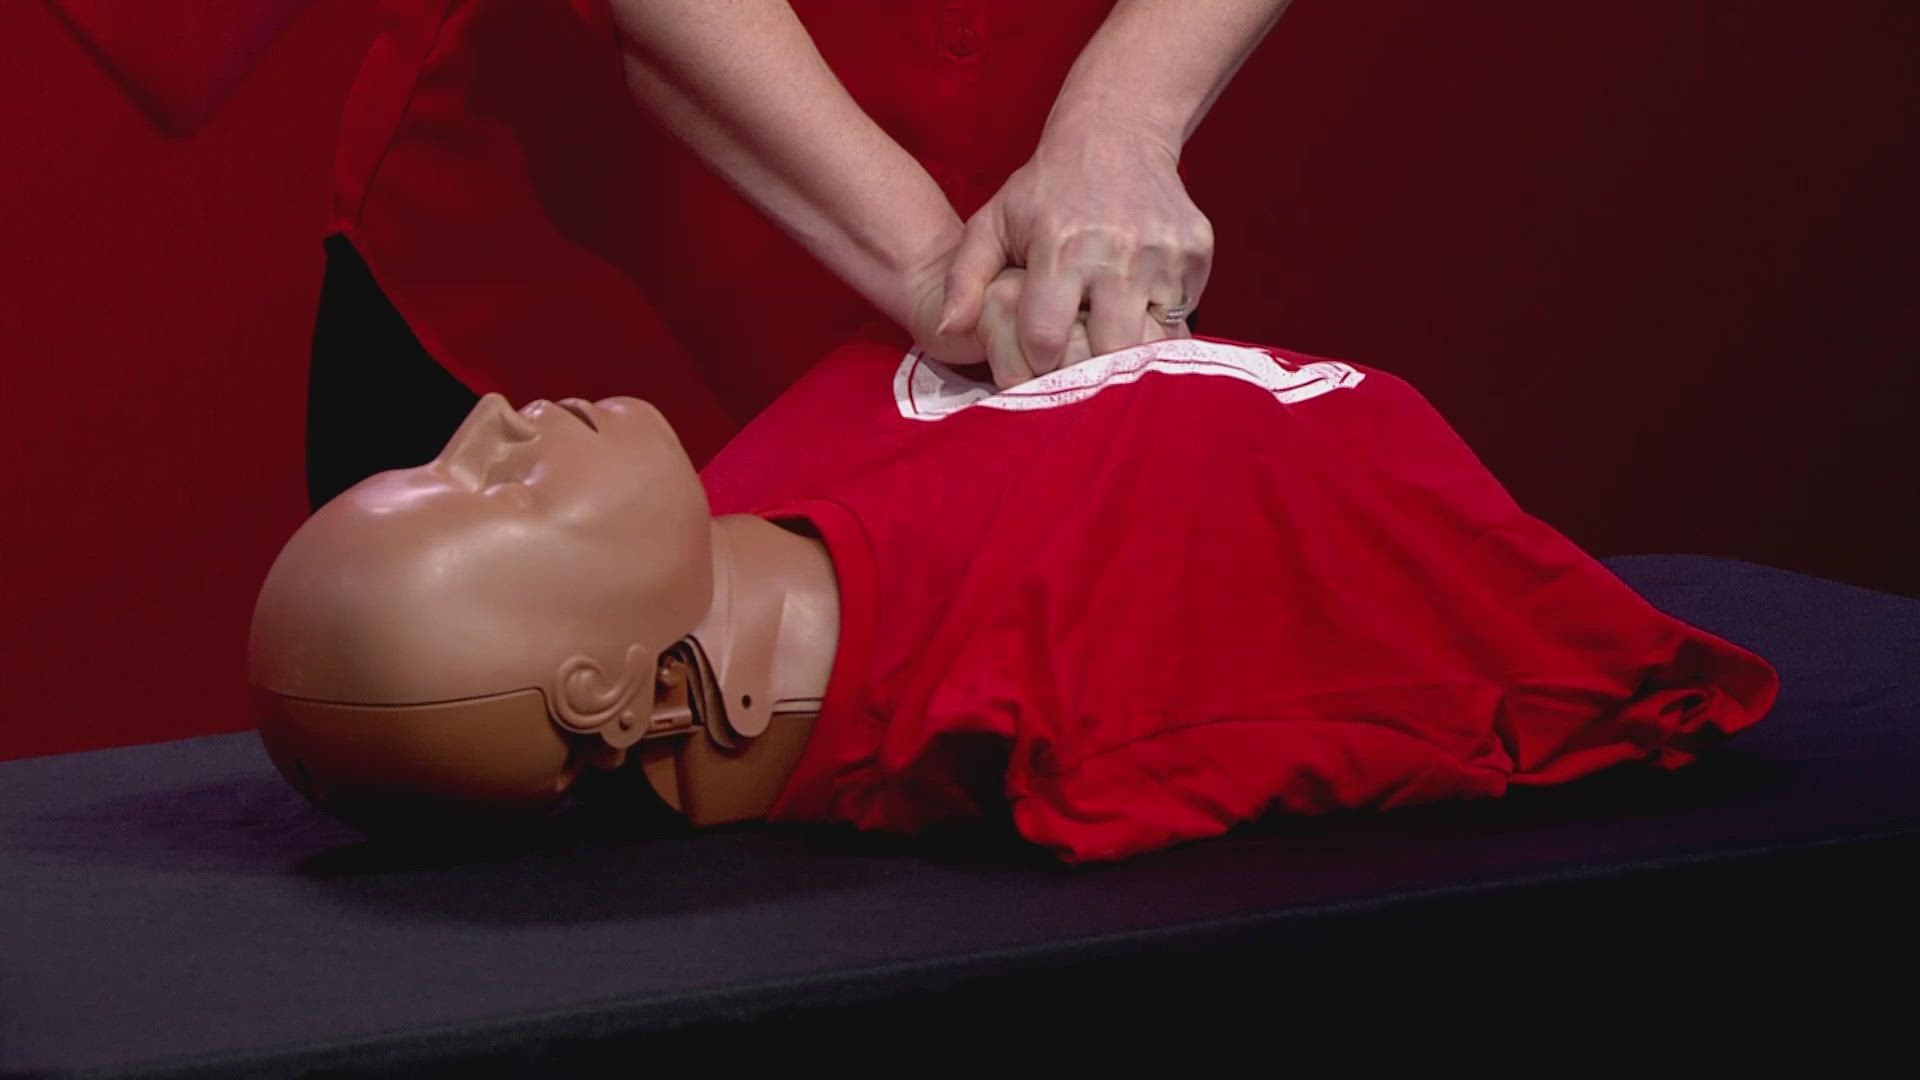 The American Heart Association is challenging all families to have at least one member of their household proficient in hands-only CPR